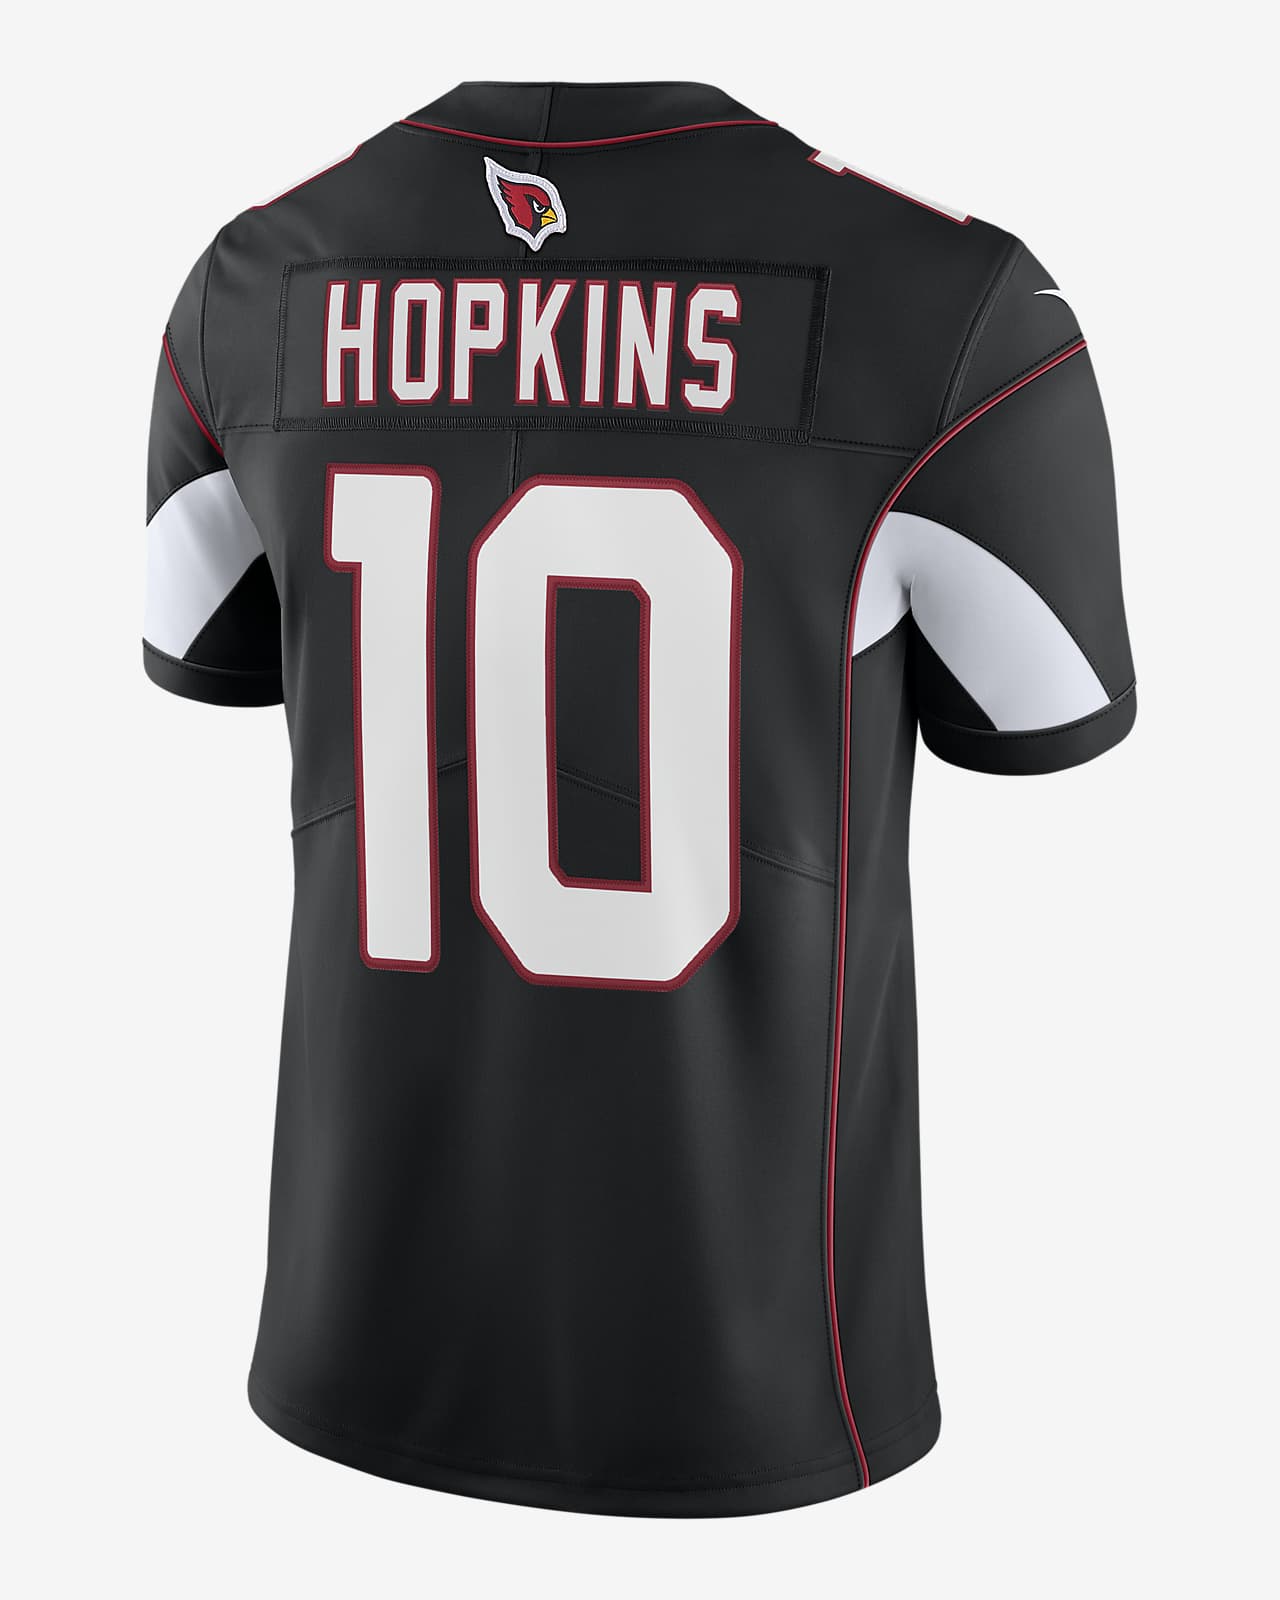 red -L Américan Football Jersey Cardinals #10 Hopkins Rugby Jersey MAX4XL Breathable Mesh Fabric on Both Sides Fitness Sweatshirt Fan Gift Men Fashion Cut 